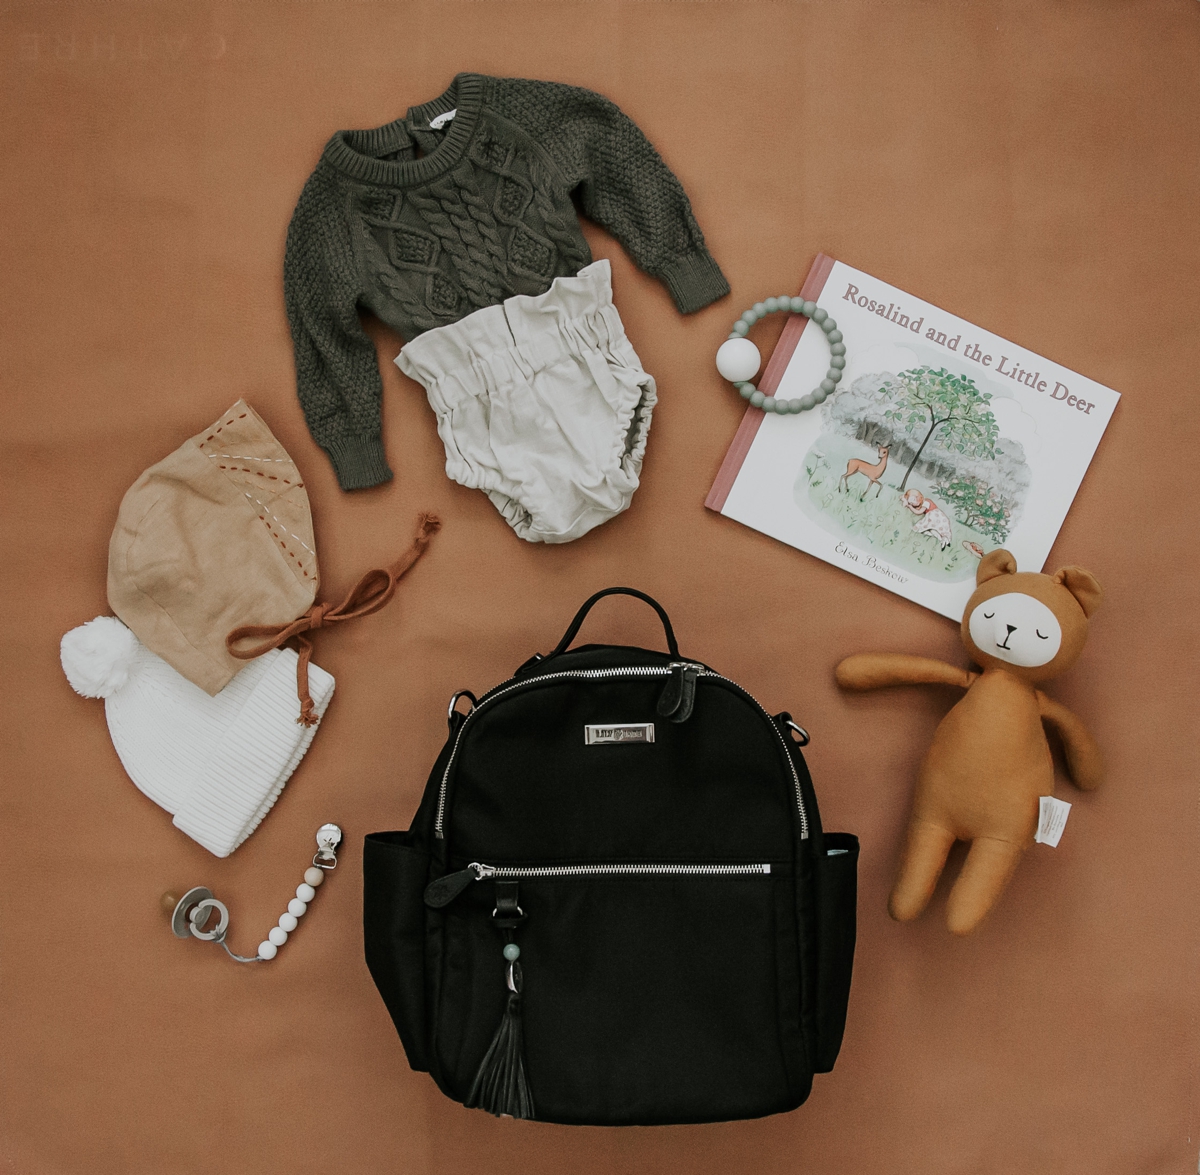 How to Pack the Perfect Diaper Bag with the Lily Jade Madeline